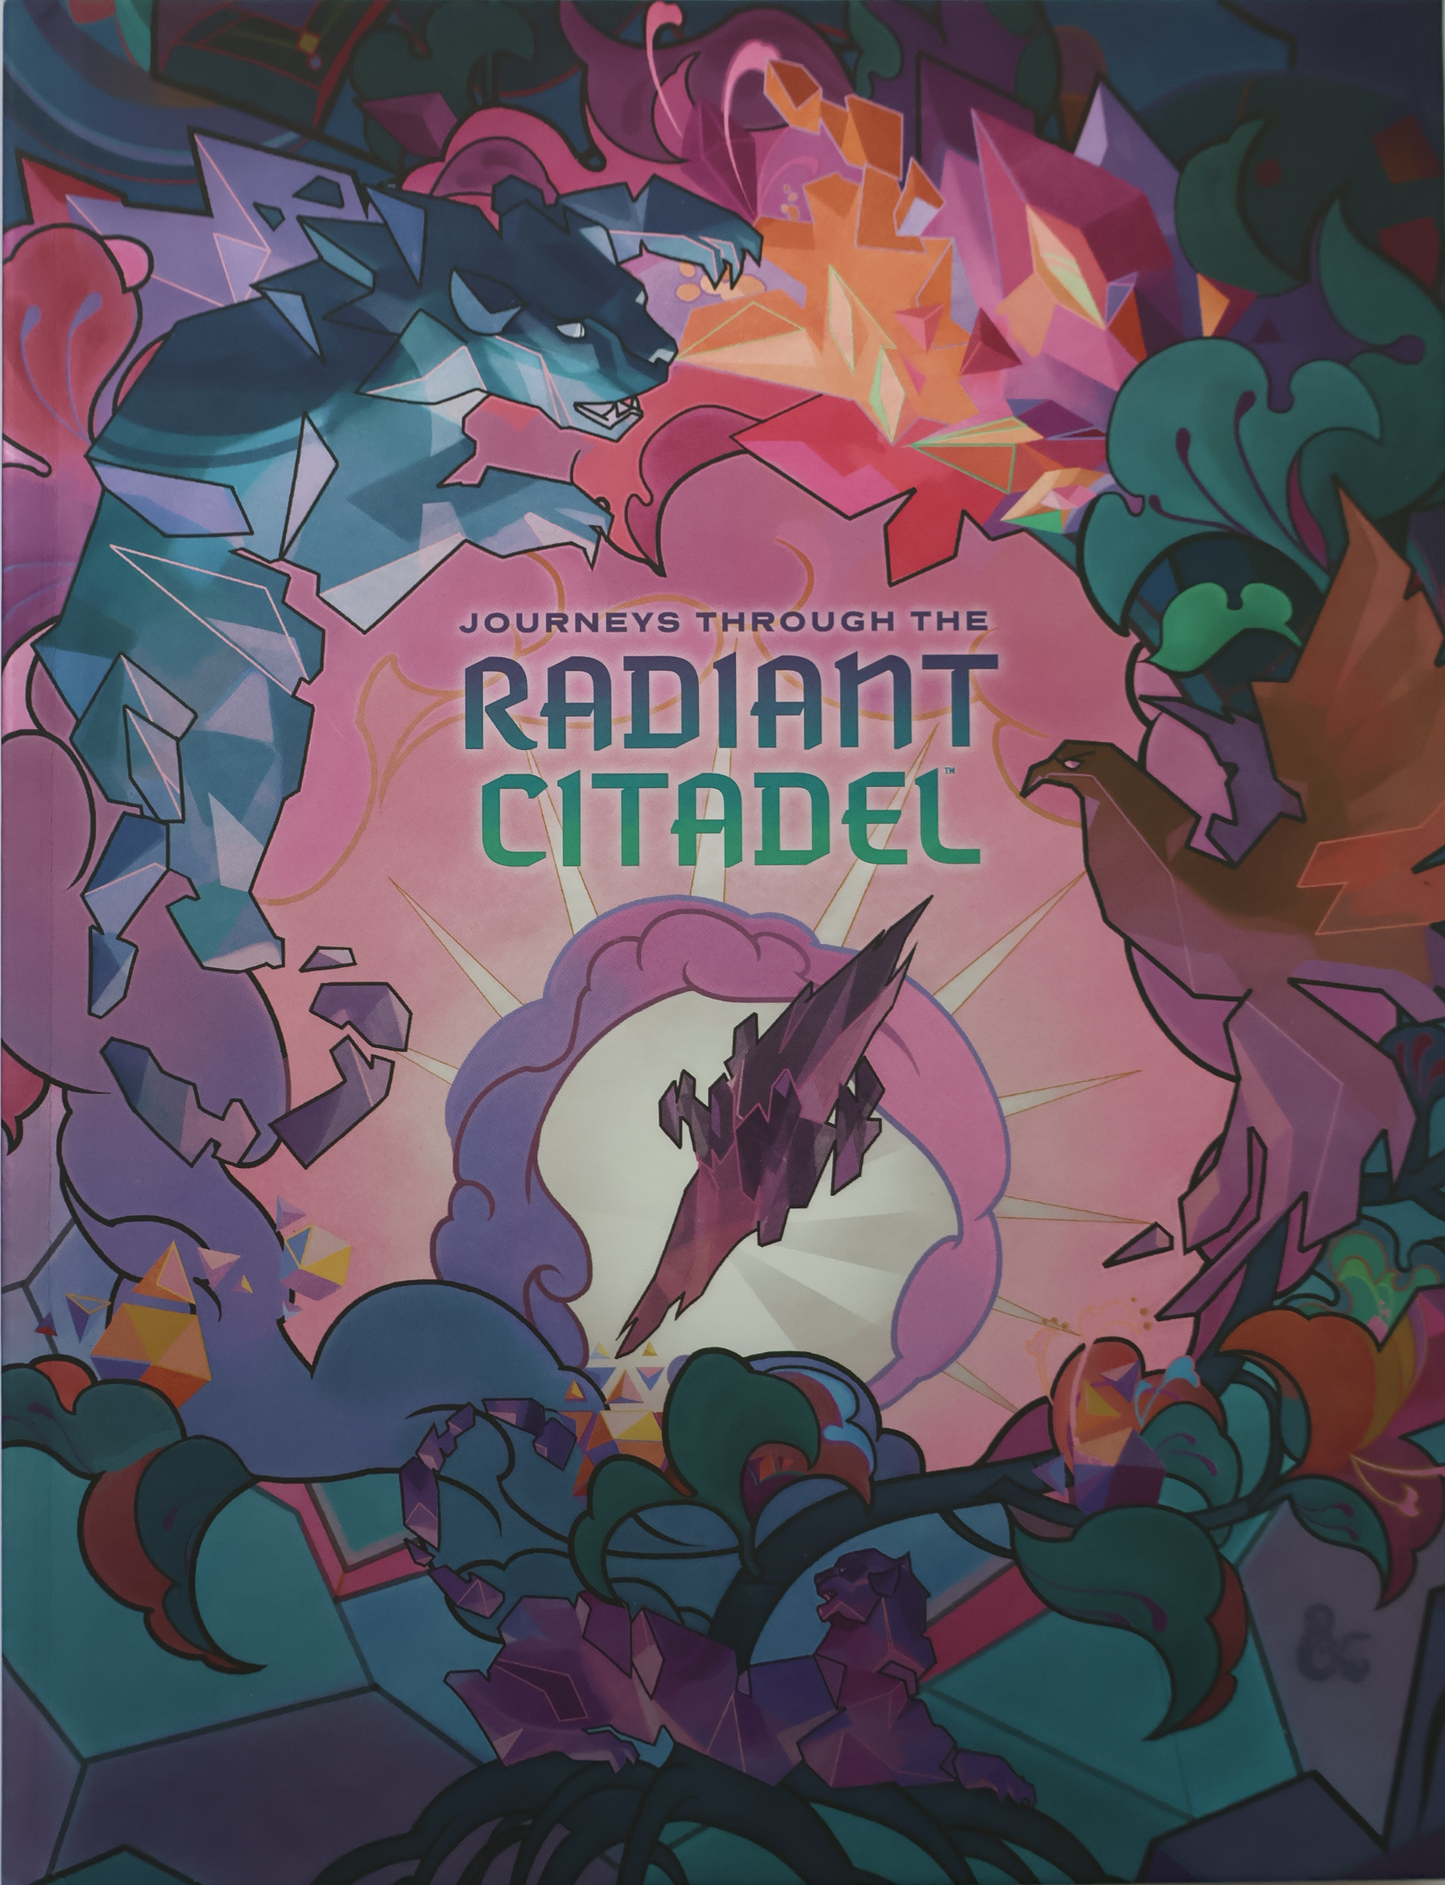 D&D Journeys Through the Radiant Citadel (WPN Exclusive Cover)